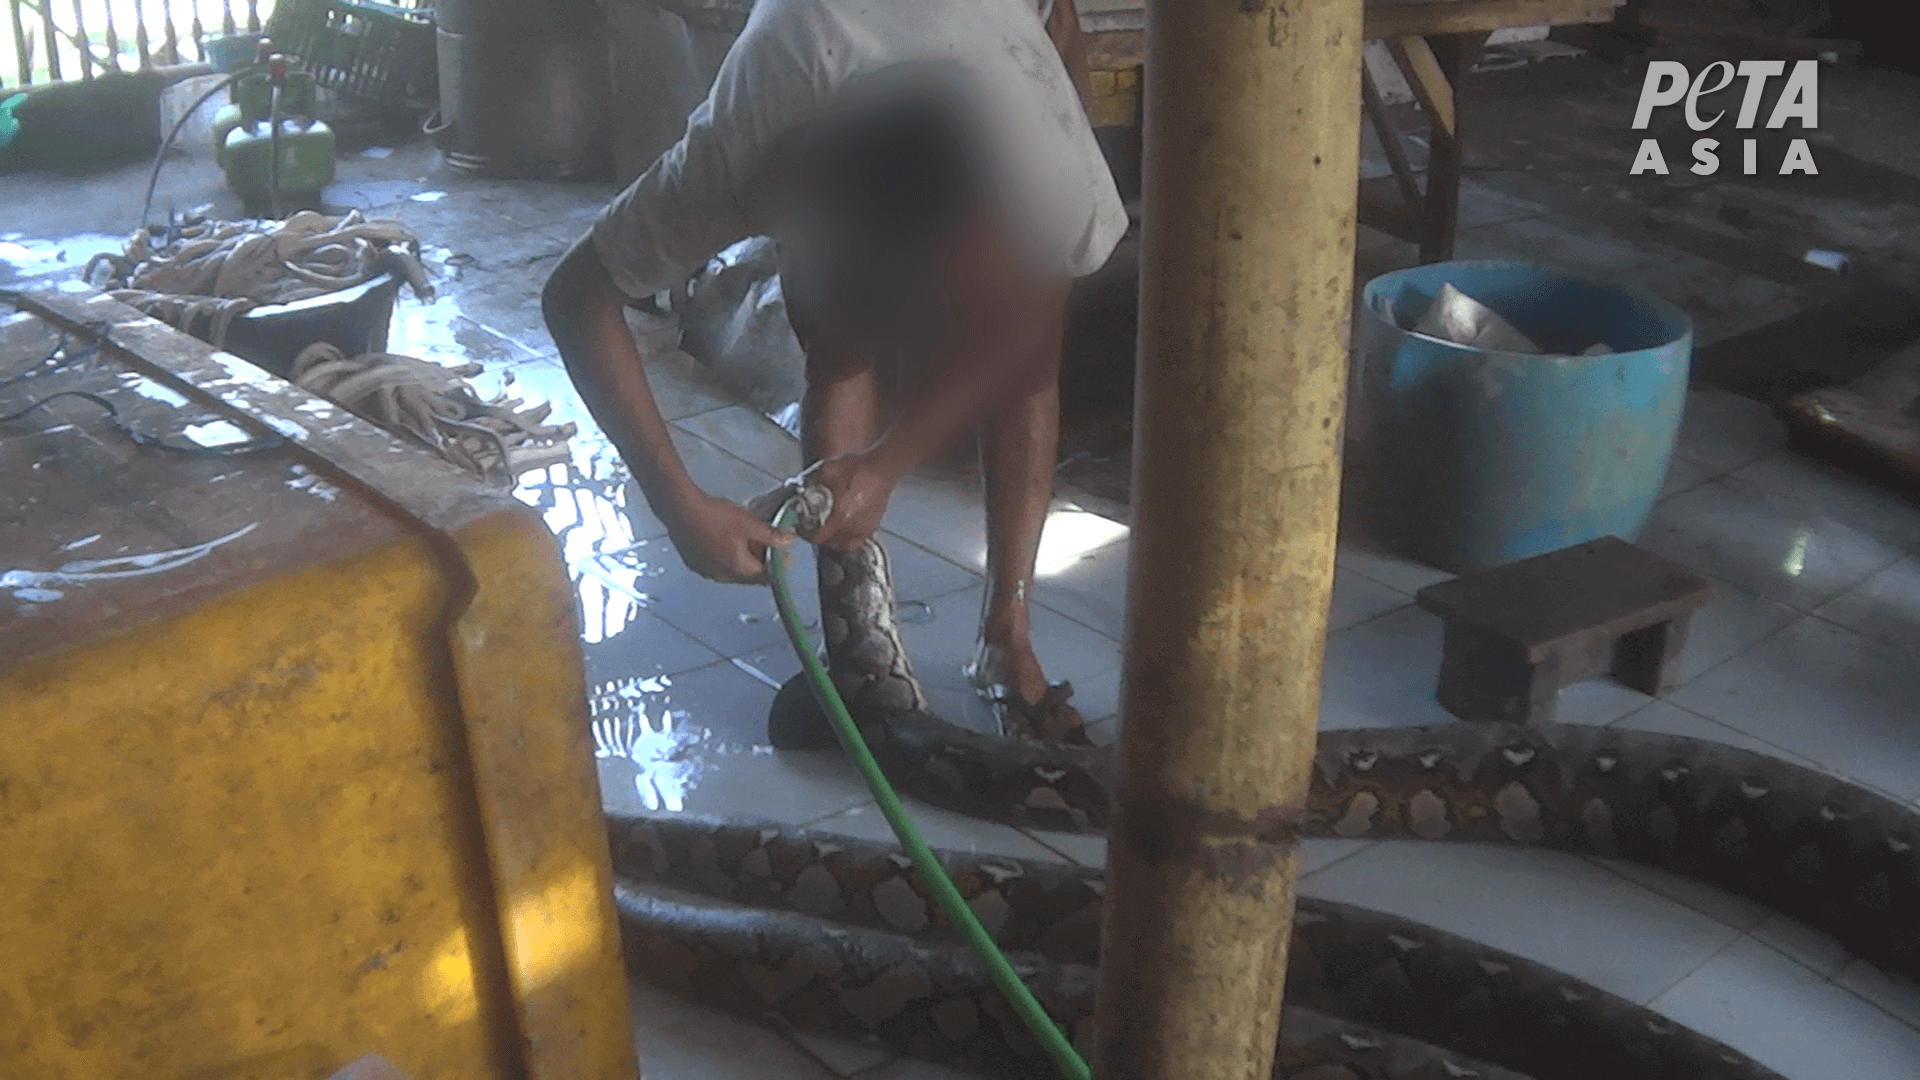 Worker inflating python at slaughterhouse supplying LVMH